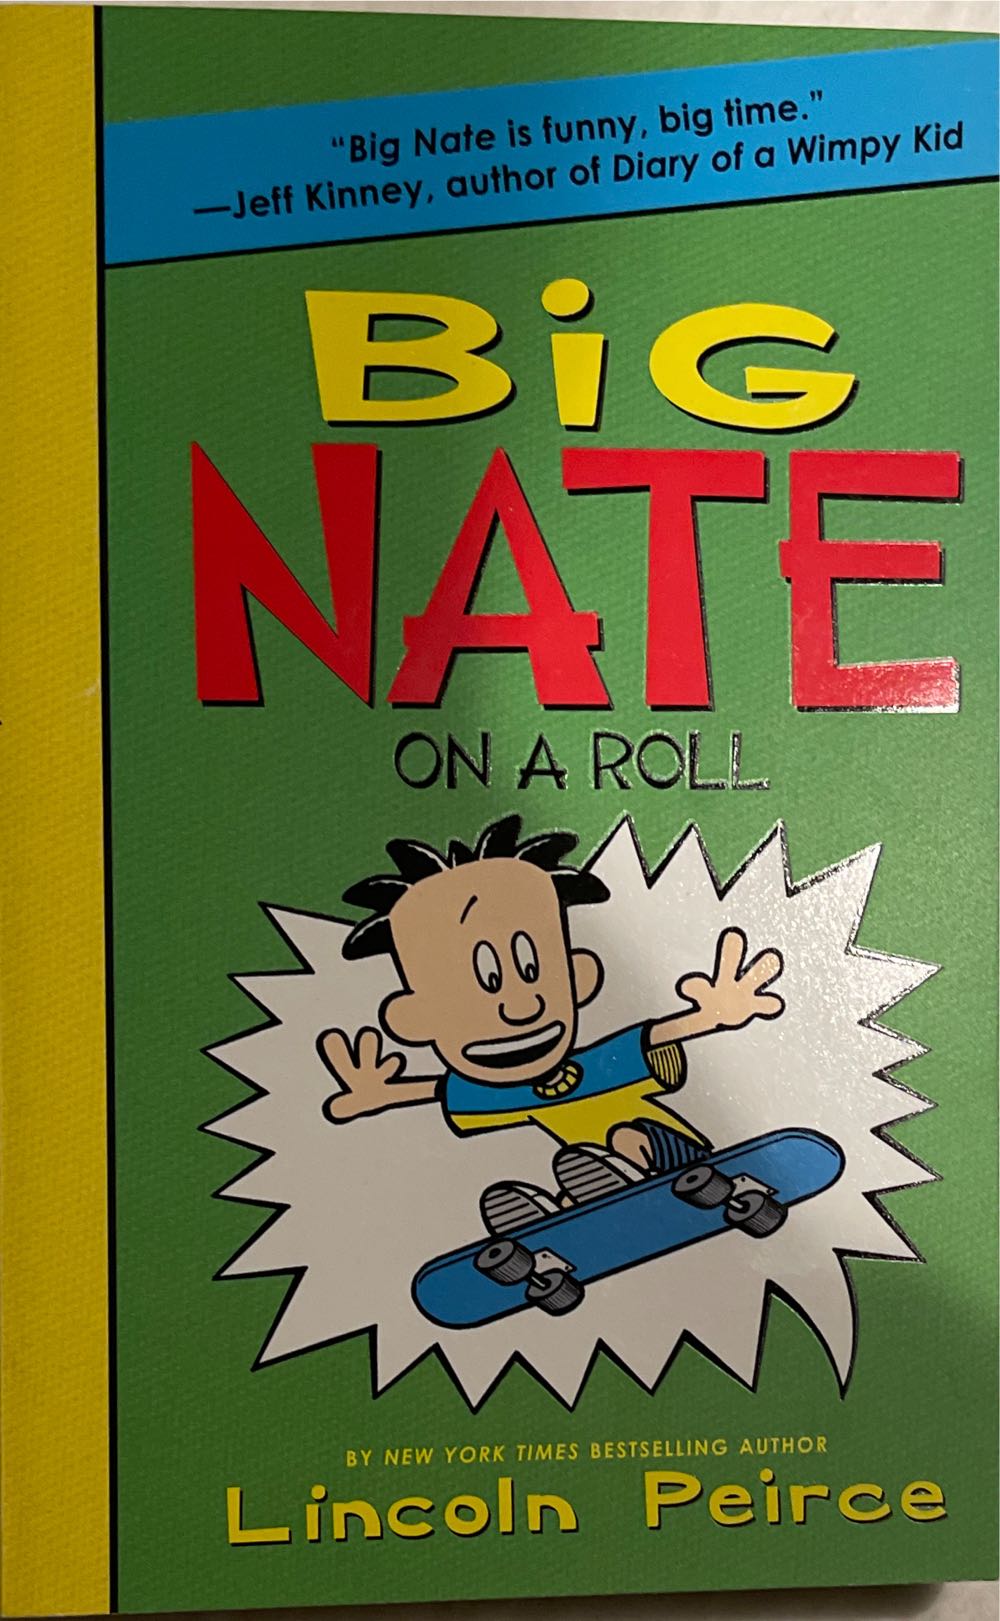 Big Nate #3: On A Roll - Lincoln Peirce (HarperCollins - Paperback) book collectible [Barcode 9780062283573] - Main Image 2